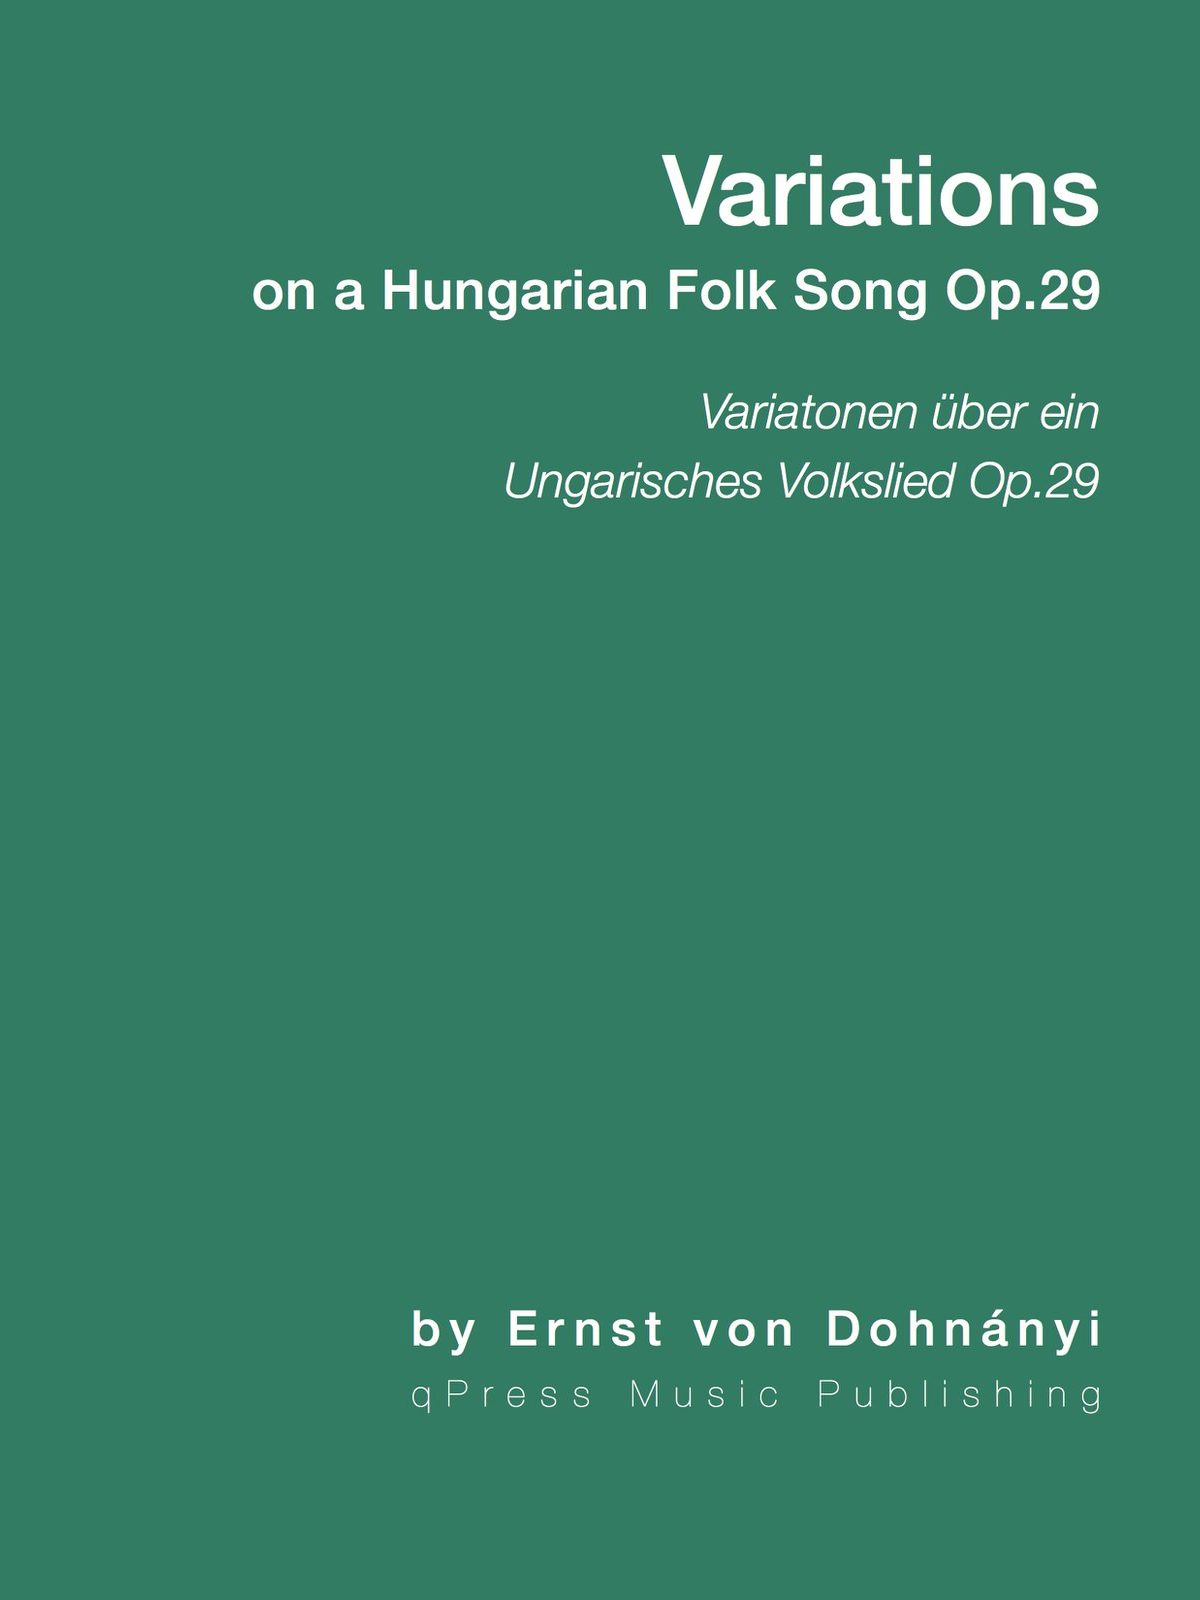 Dohnanyi, Variations on a Hungarian Folksong, Op.29-p01